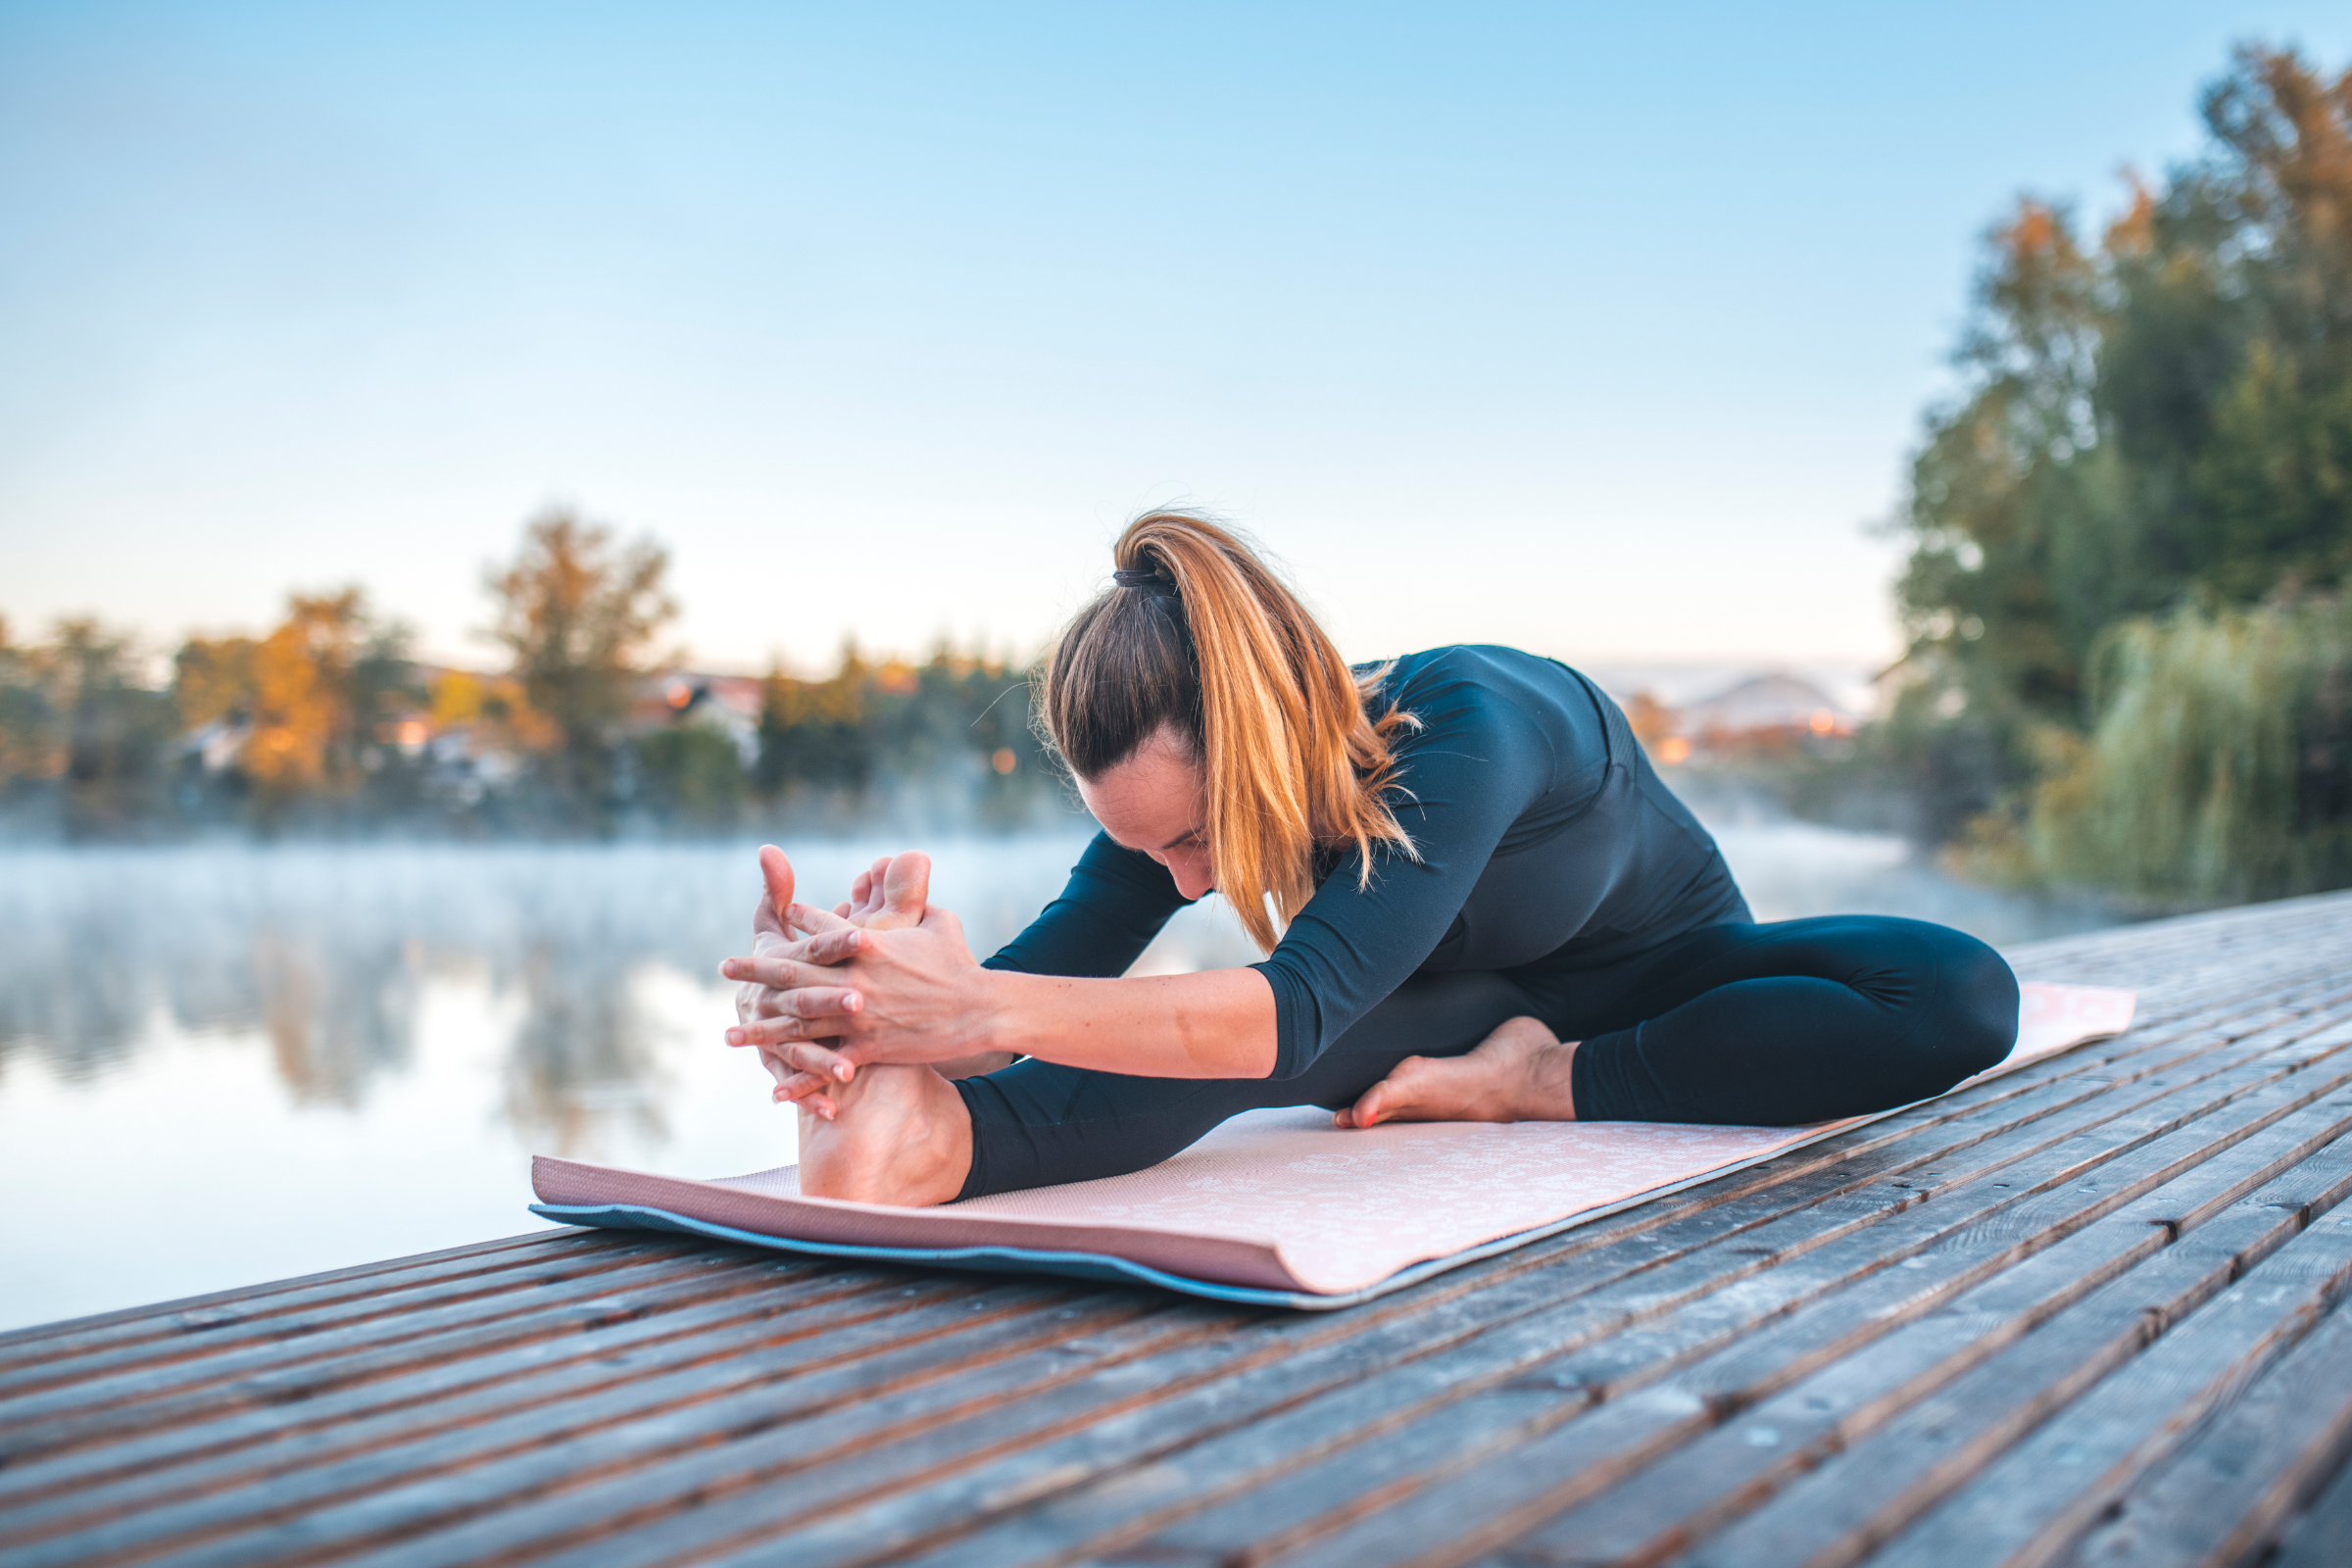 blonde woman with ponytail wearing all black on a wooden dock by water doing head to knee forward bend pose